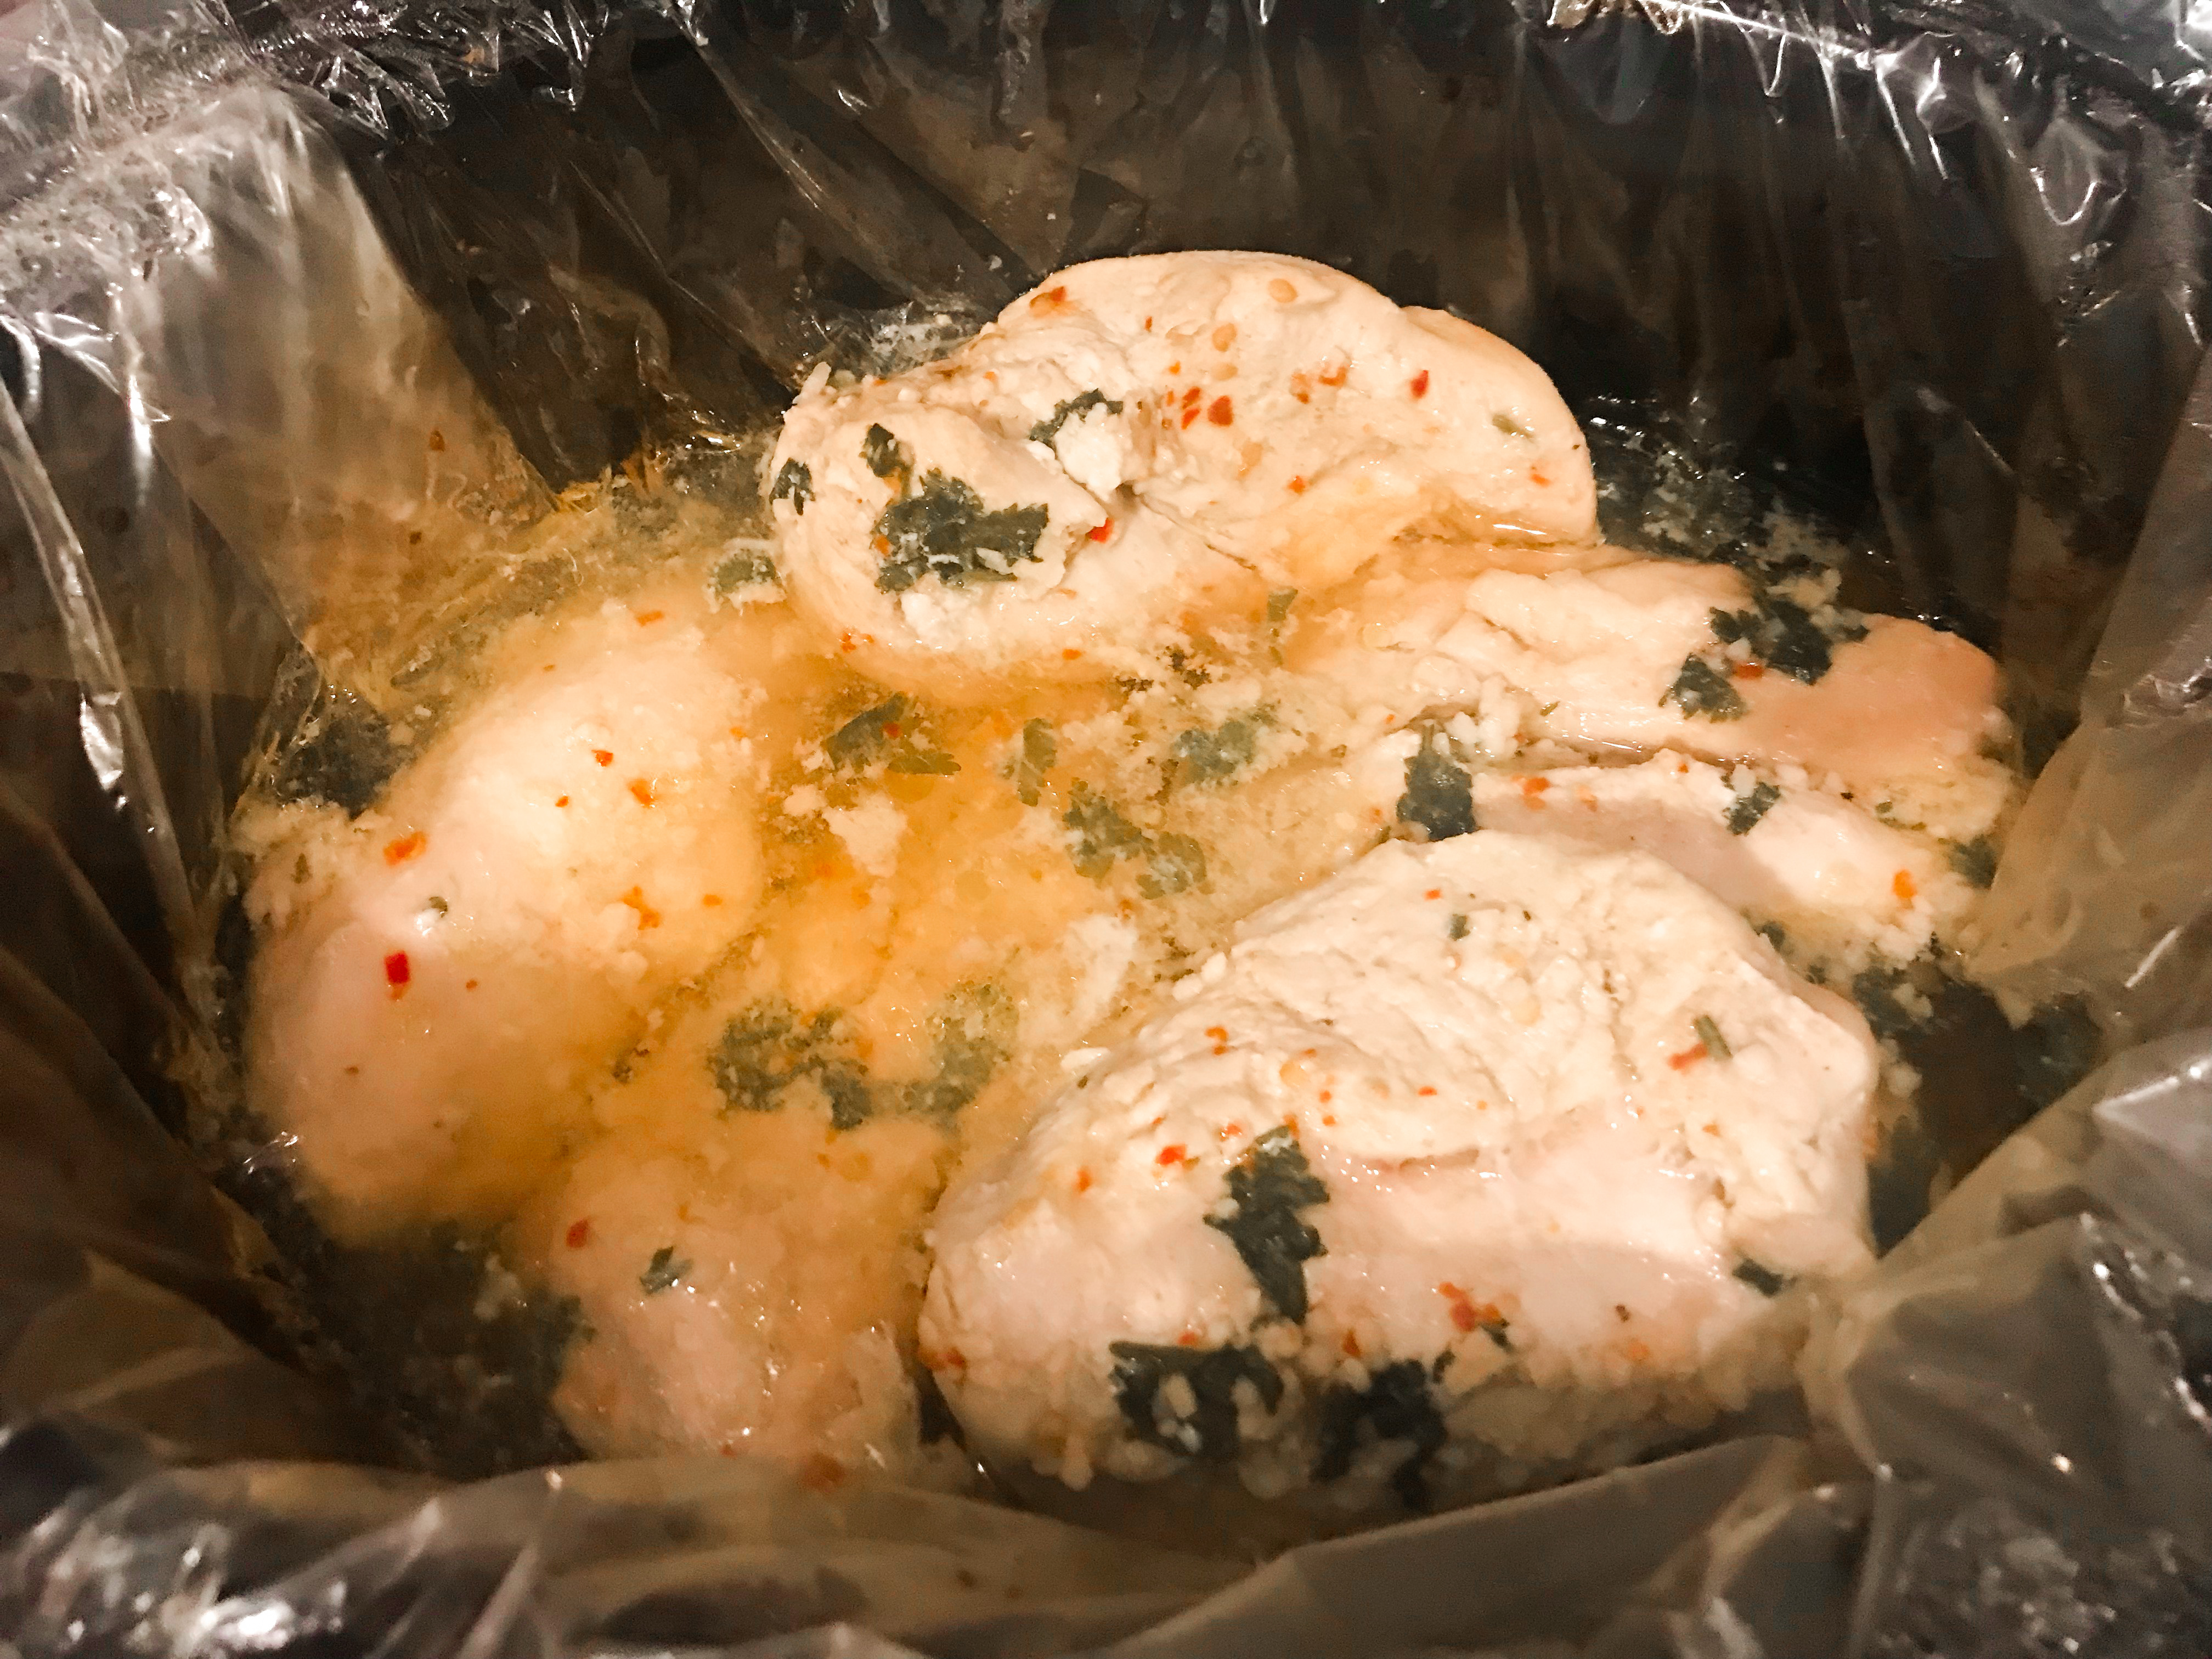 Cooked chicken and seasonings in a lined crockpot. 